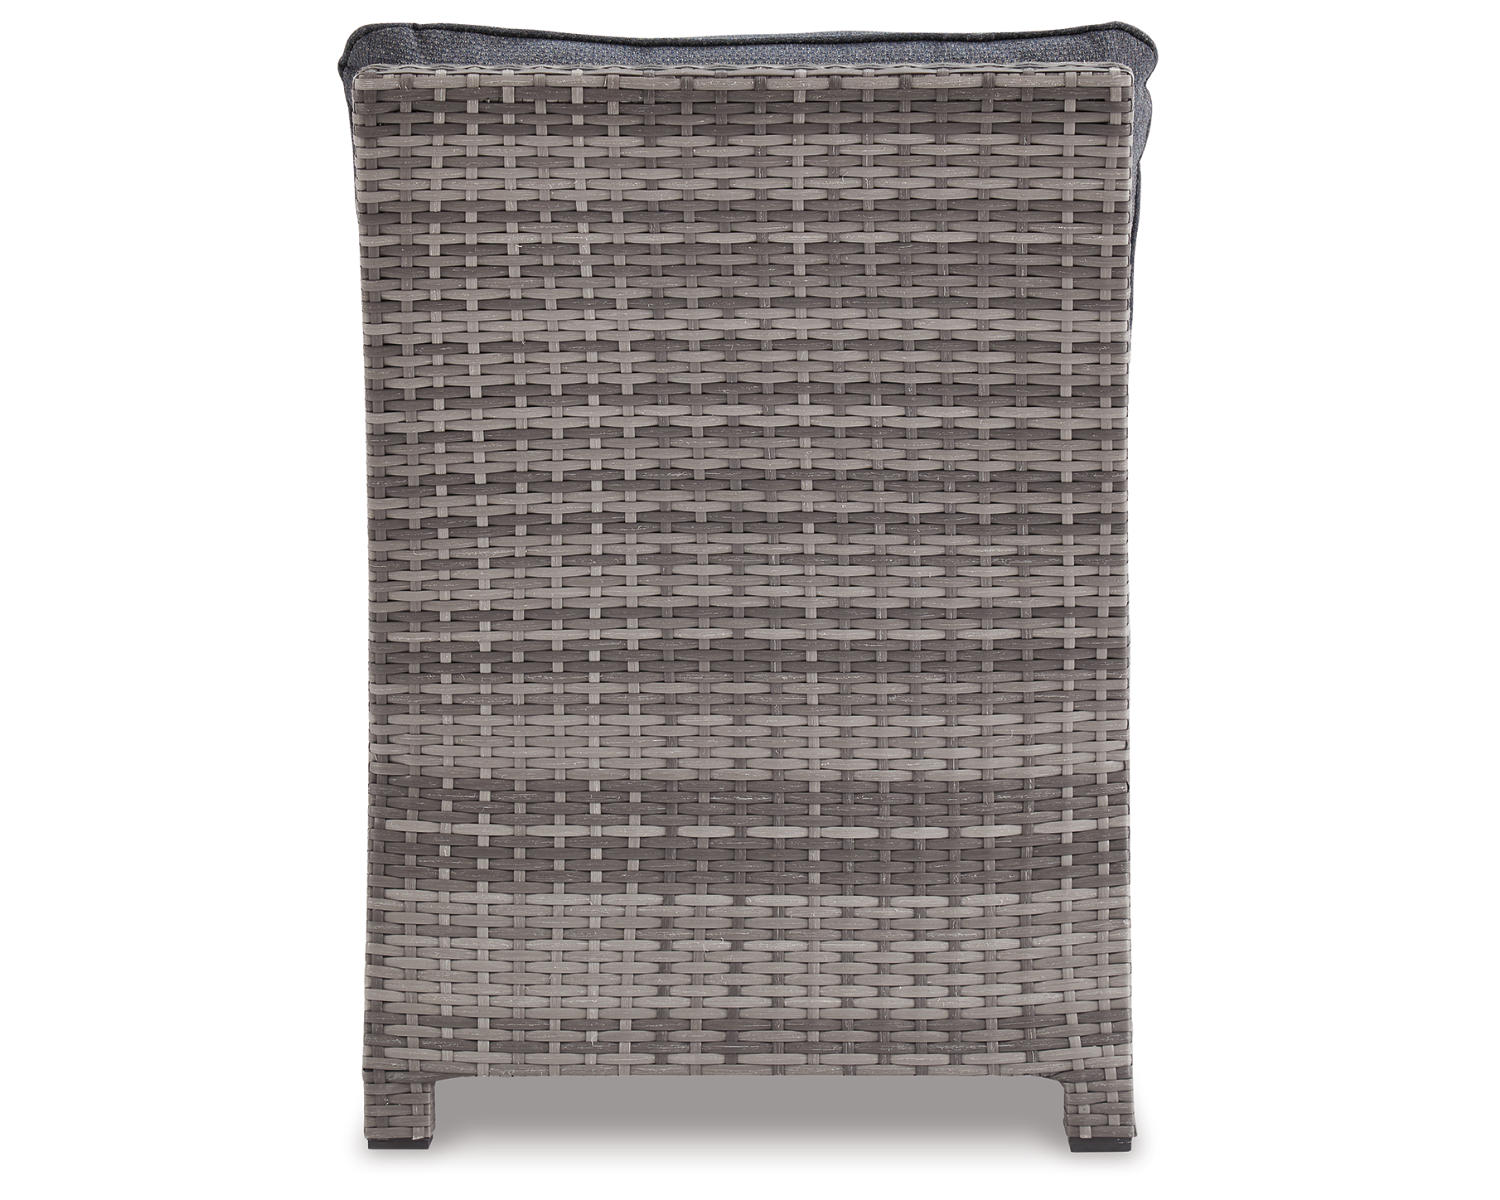 Signature Design by Ashley Salem Beach Outdoor Resin Wicker Armless Chair, Gray - image 3 of 6